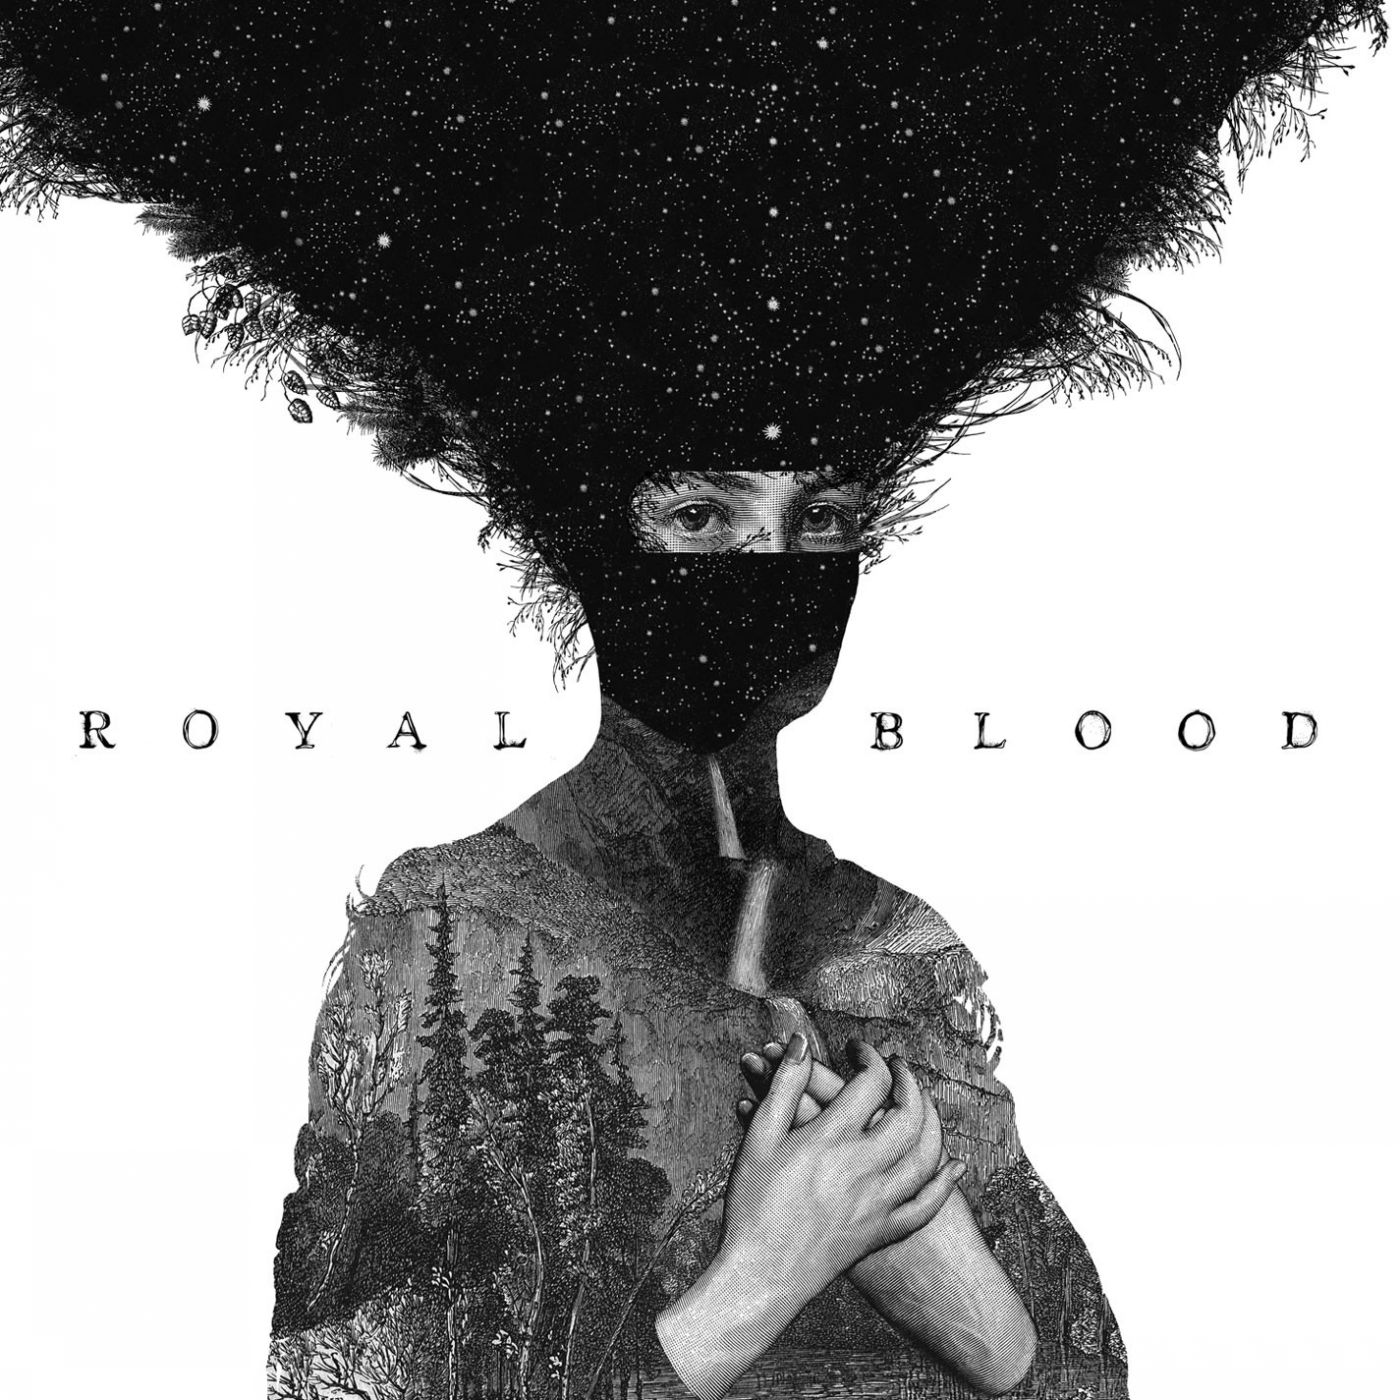 Art for Figure It Out by Royal Blood